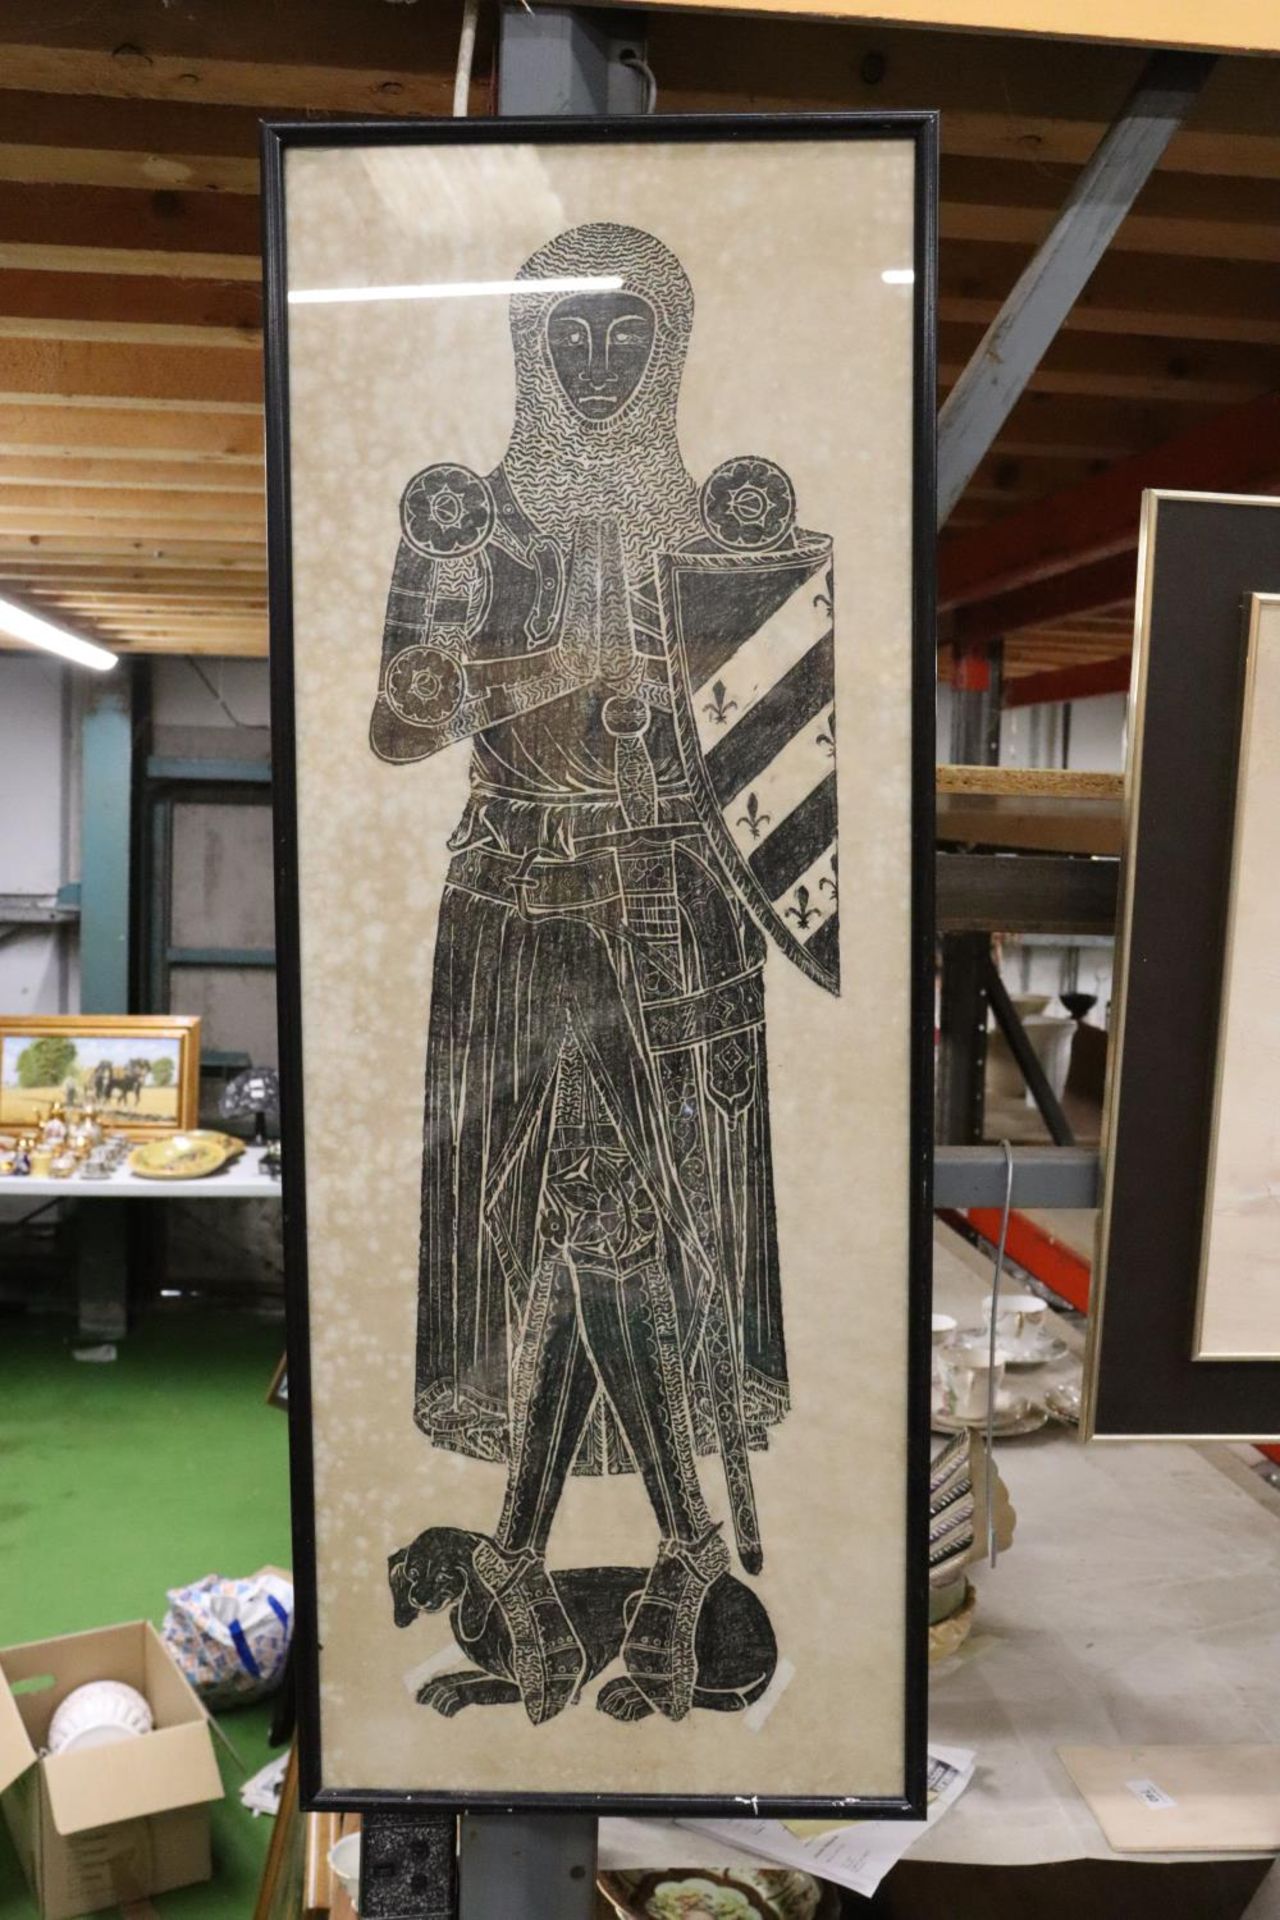 A BRASS RUBBING PRINT OF A MEDIEVAL KNIGHT BELIEVED TO DEPICT SIR WILLIAM FITZRALPH 1323,